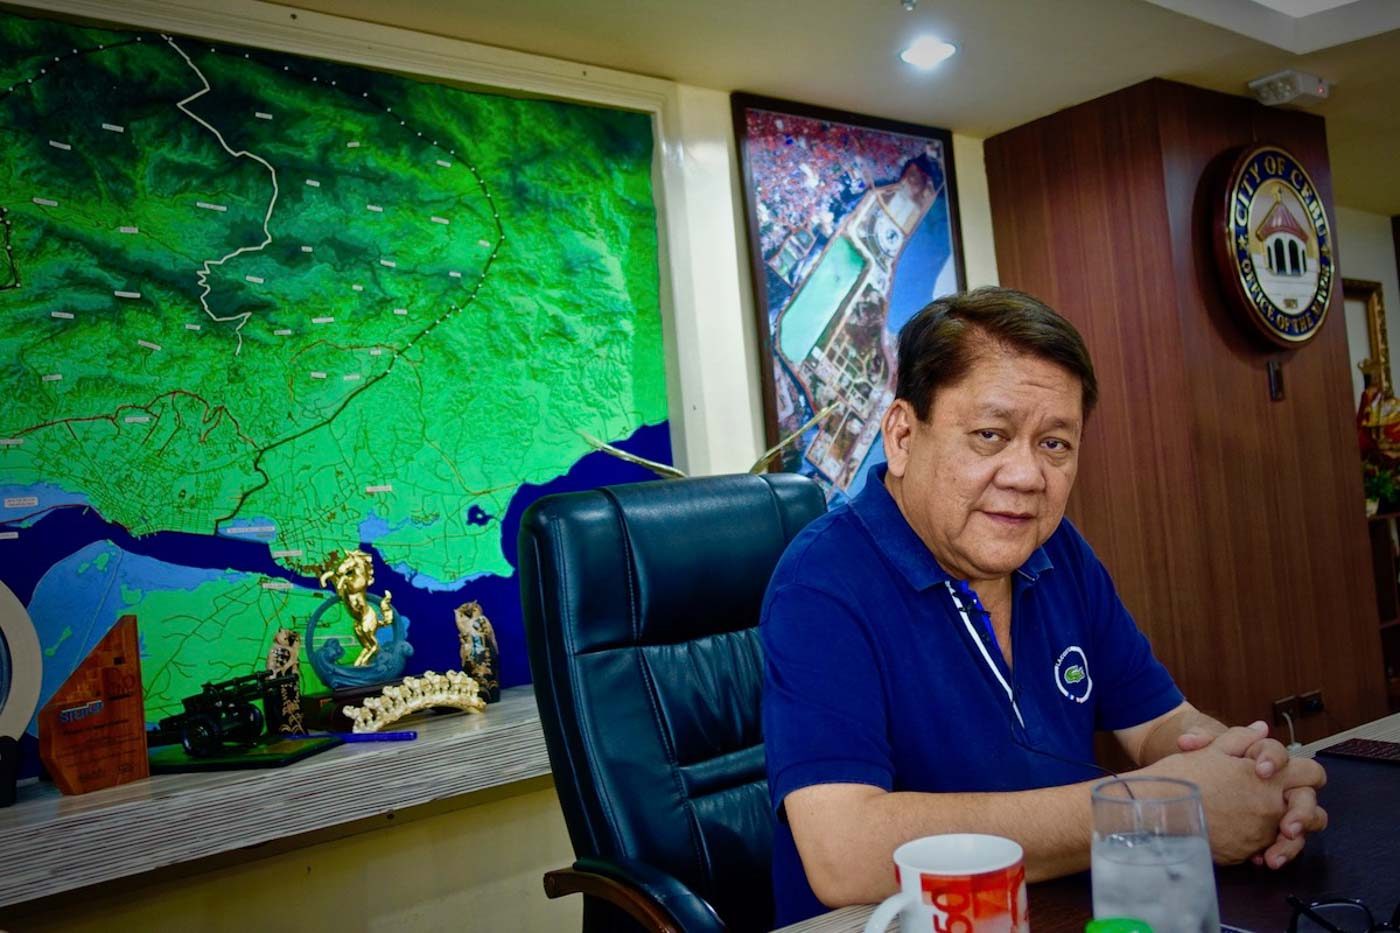 AT ‘HOME.’ Tommy Osmeña finds comfort in his 8th floor office at city hall, with the map of Cebu behind him, and a window that gives him a glimpse of the city. Photo by Rambo Talabong/Rappler